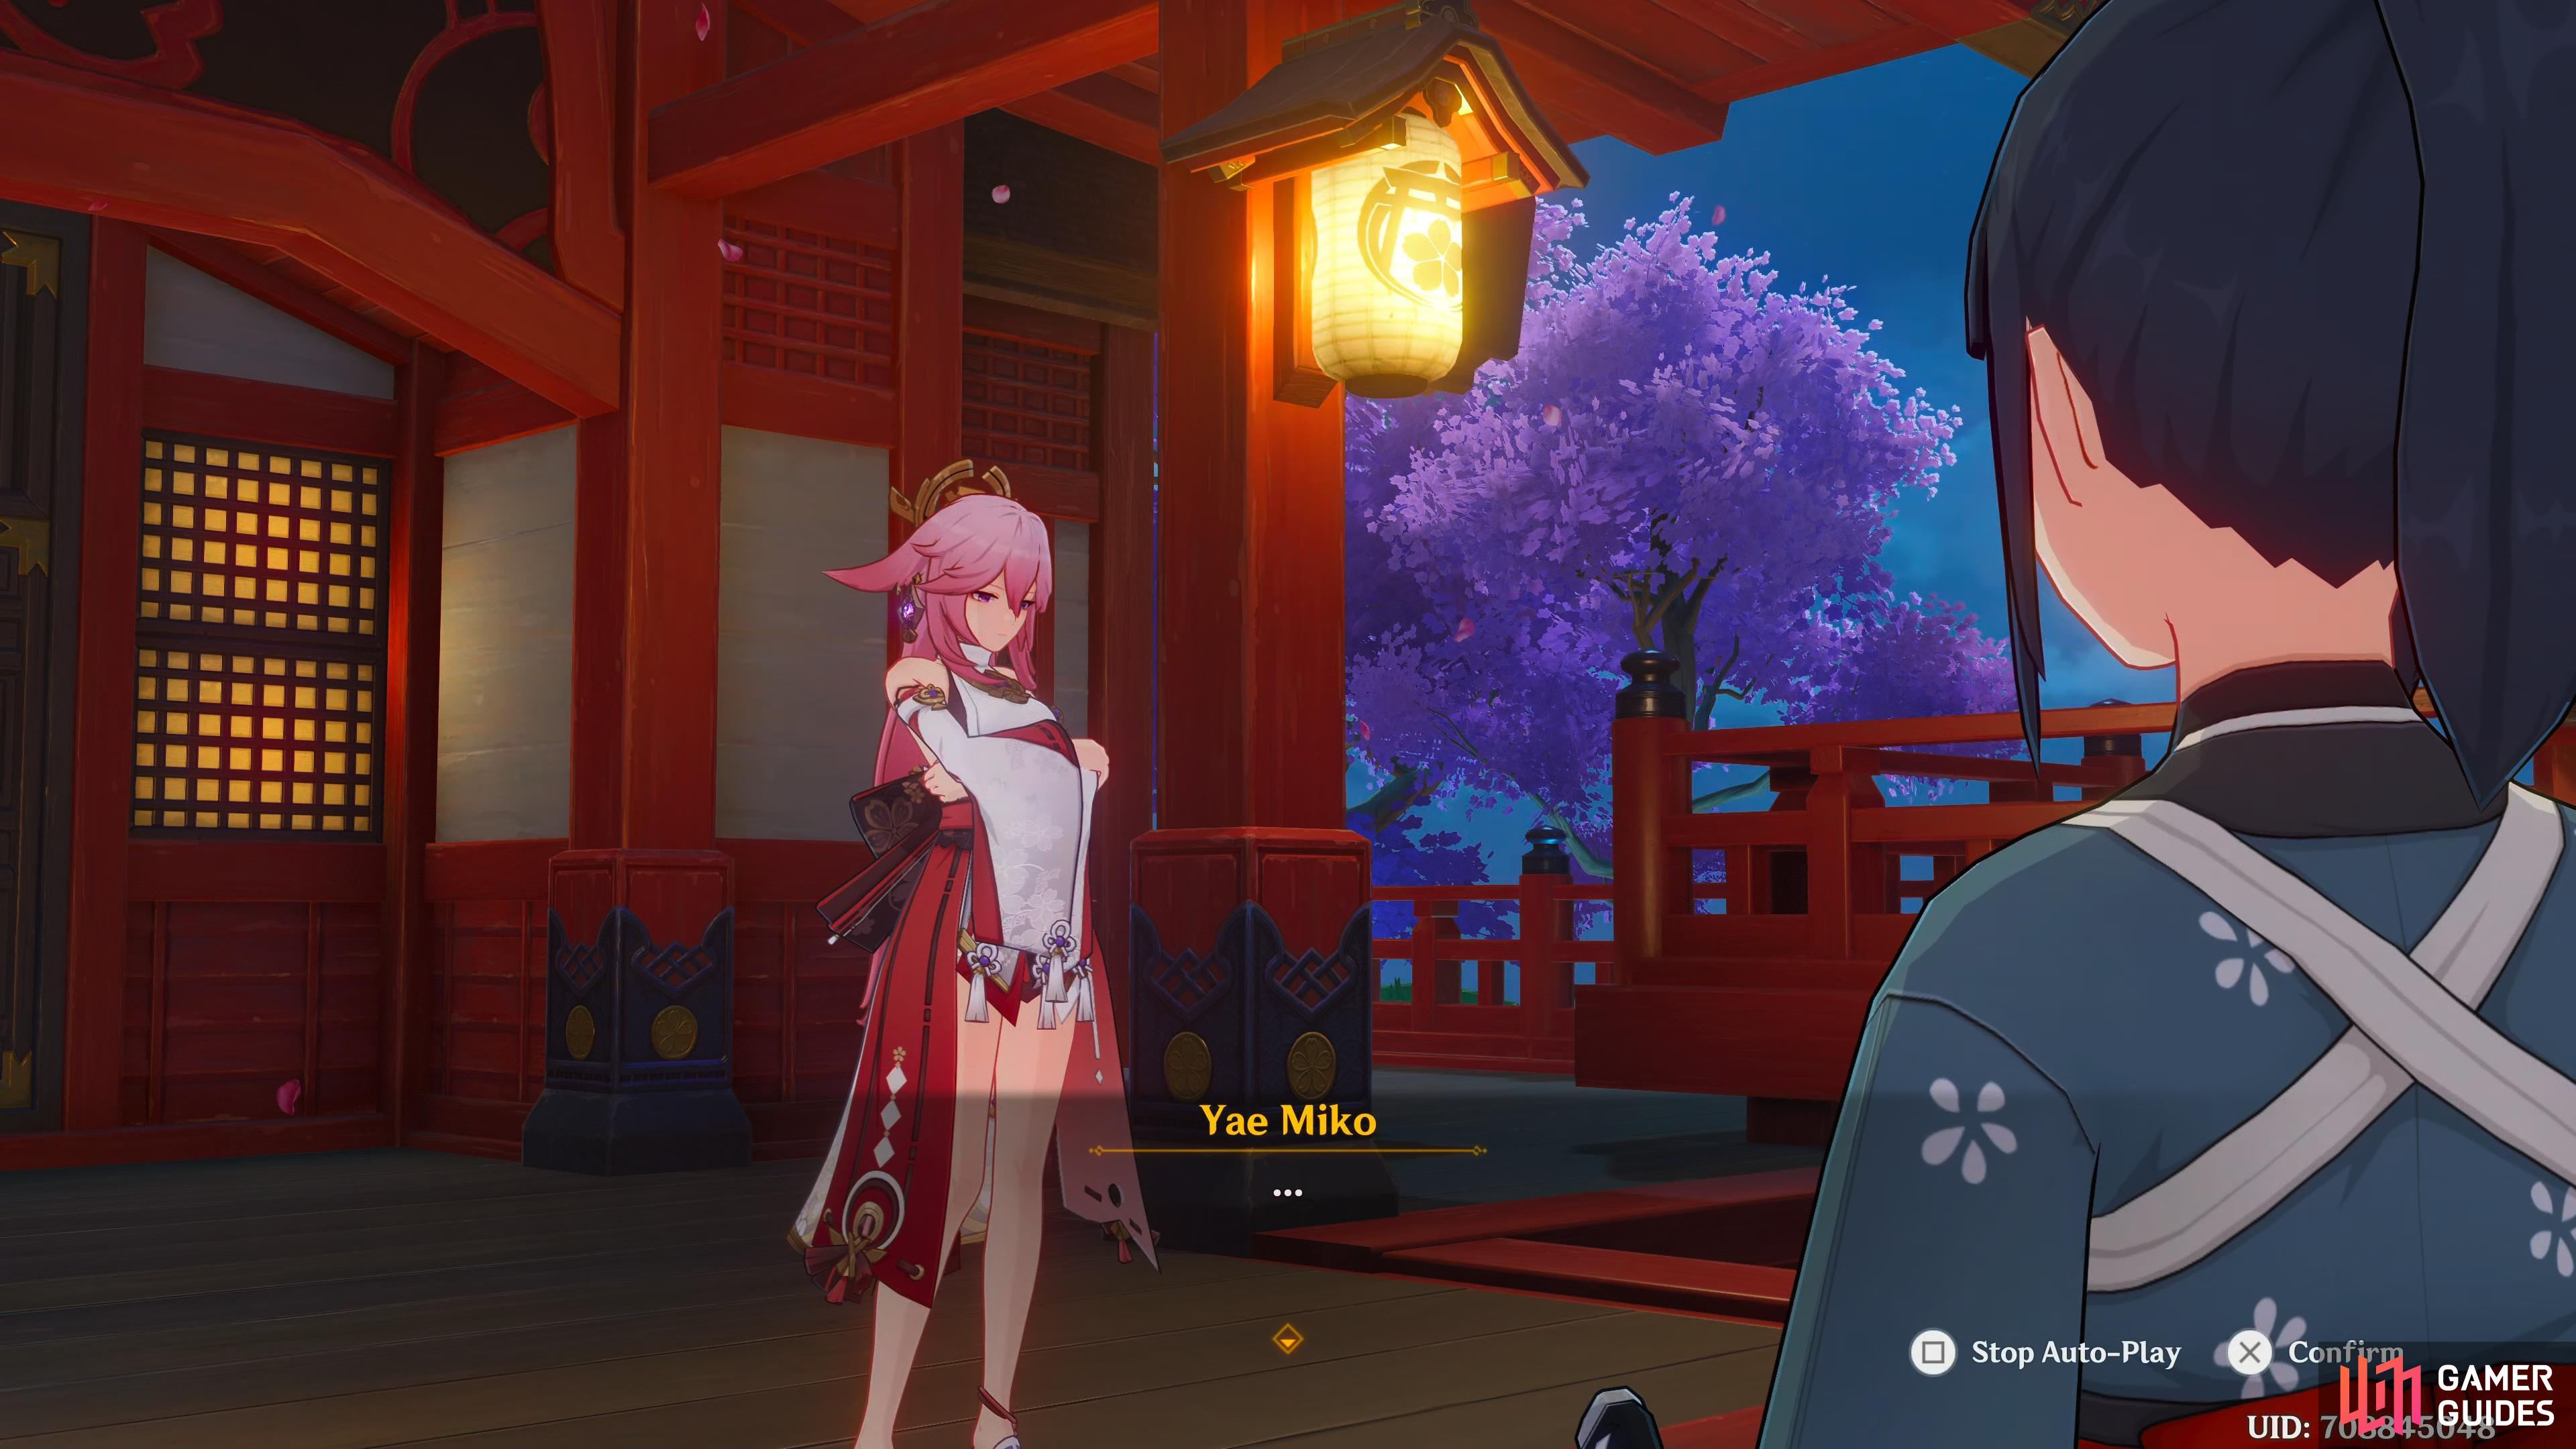 Yae Miko will be a future playable character.